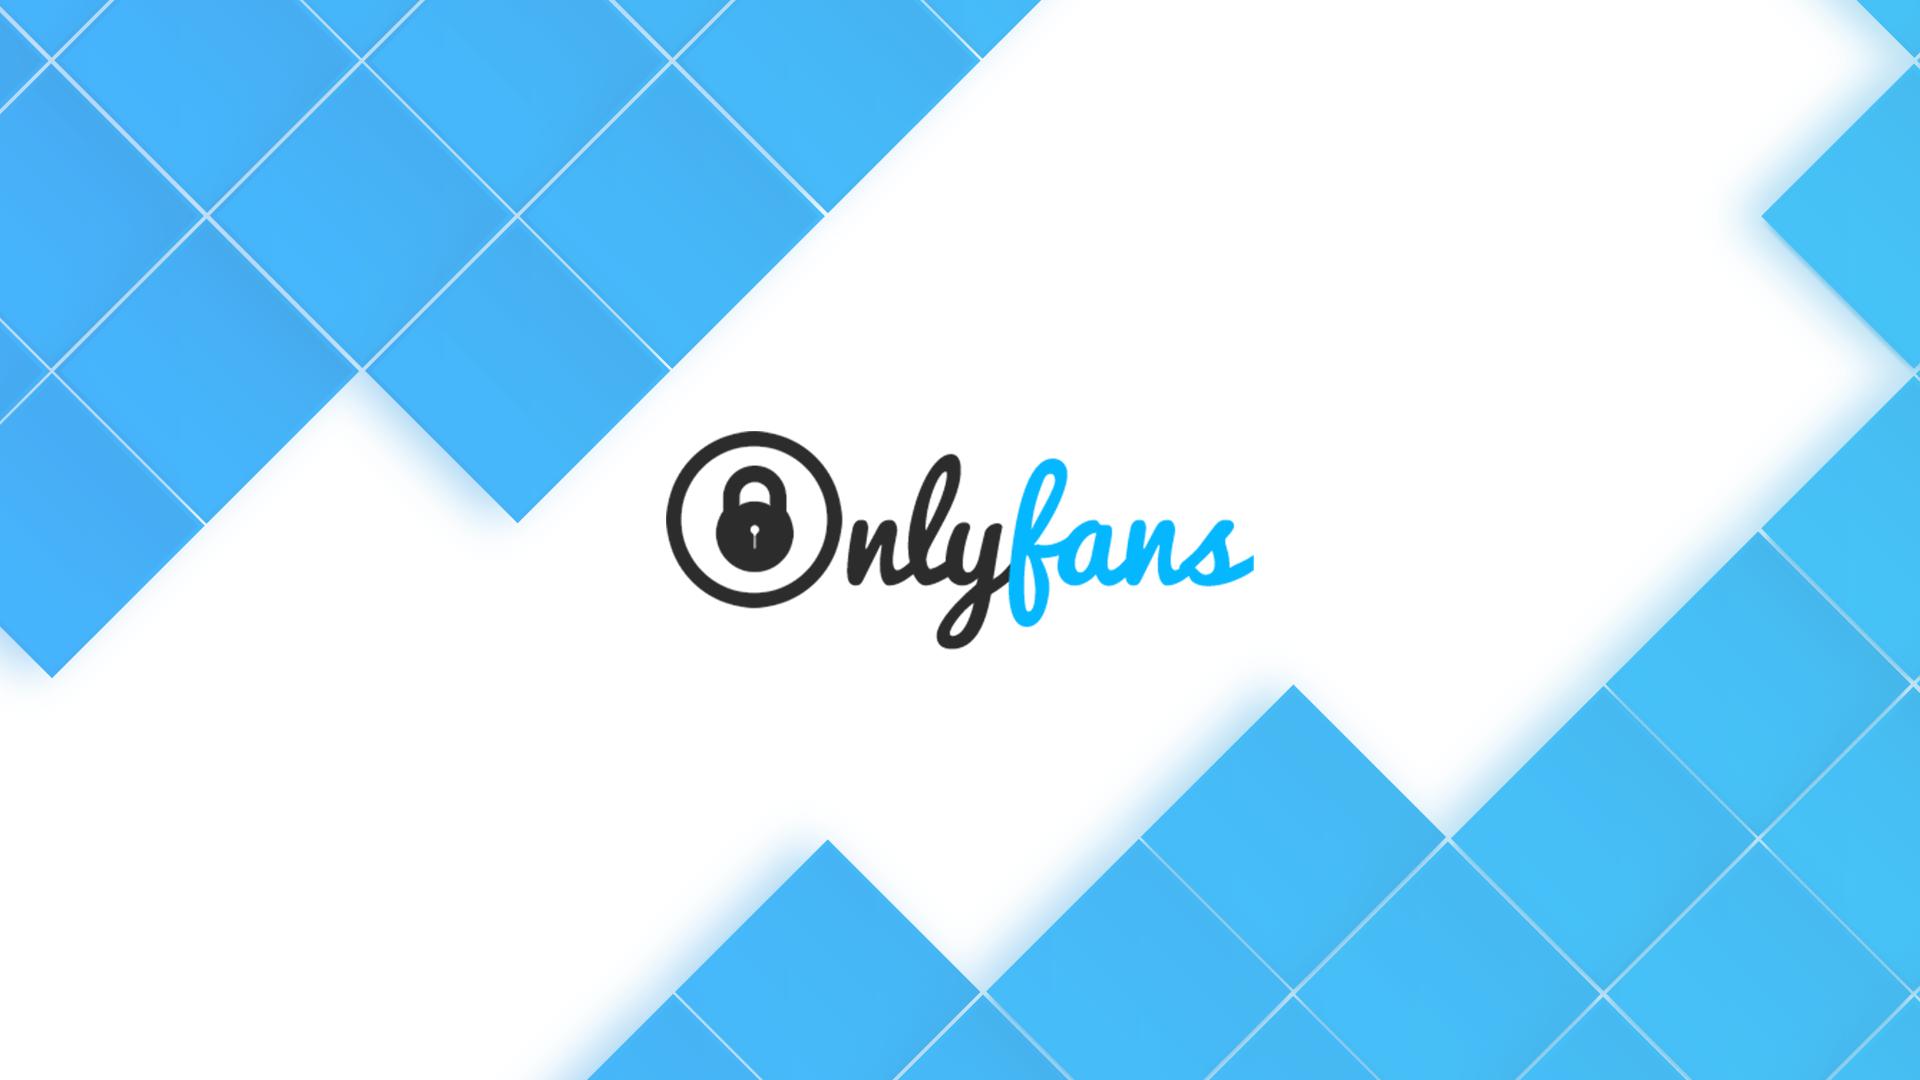 New only fans. Онлифанс логотип. Only Fans логотип. Онлифанс заставка. Onlyfans картинка.